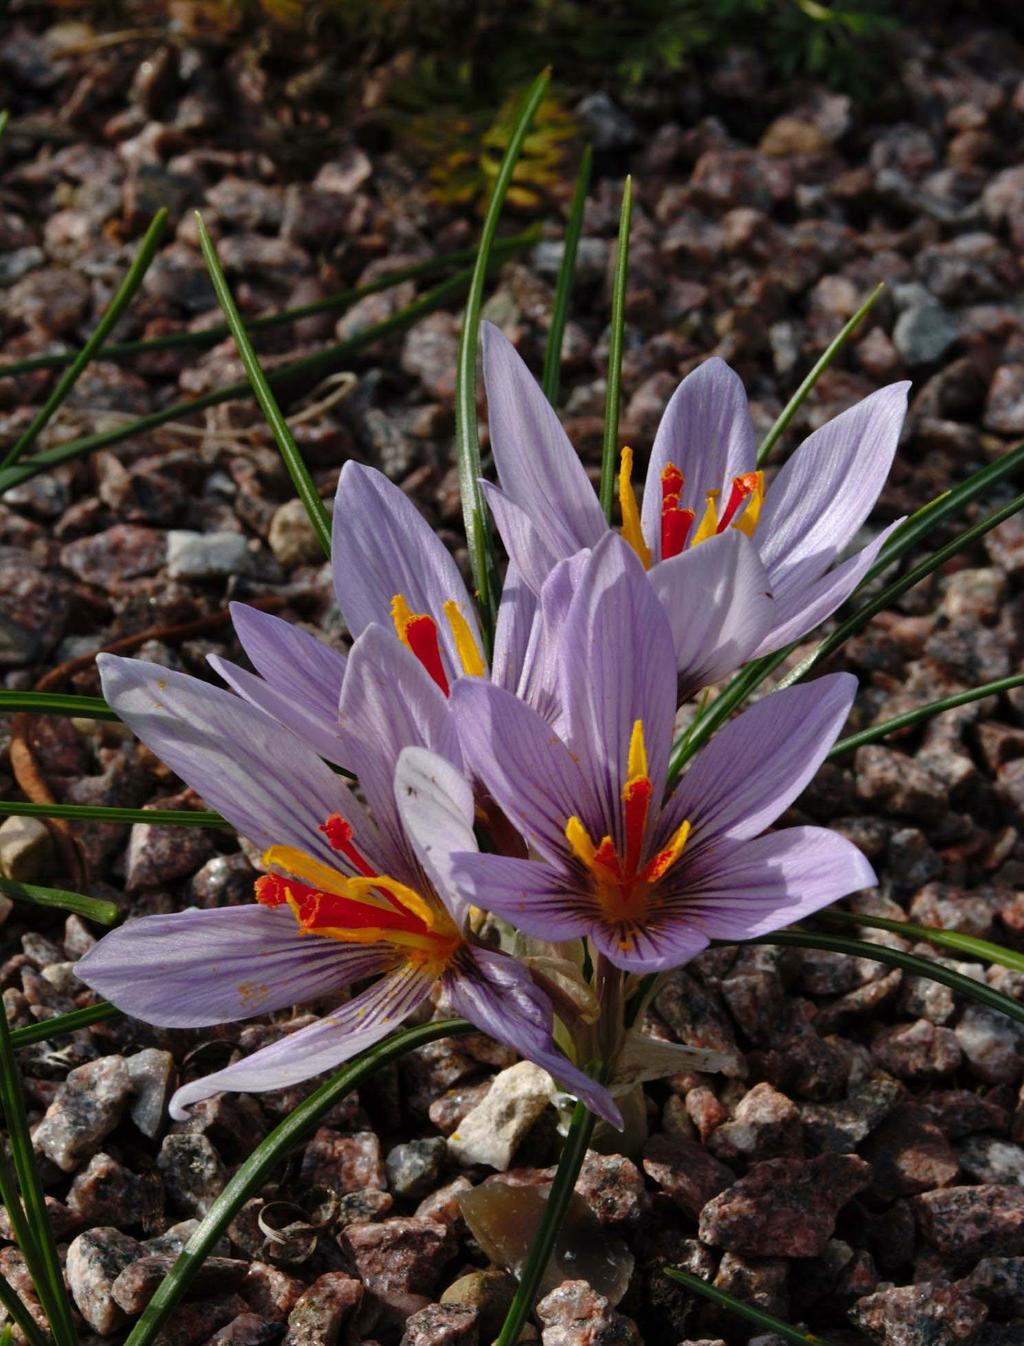 Crocus cartwrightianus planted outside in a